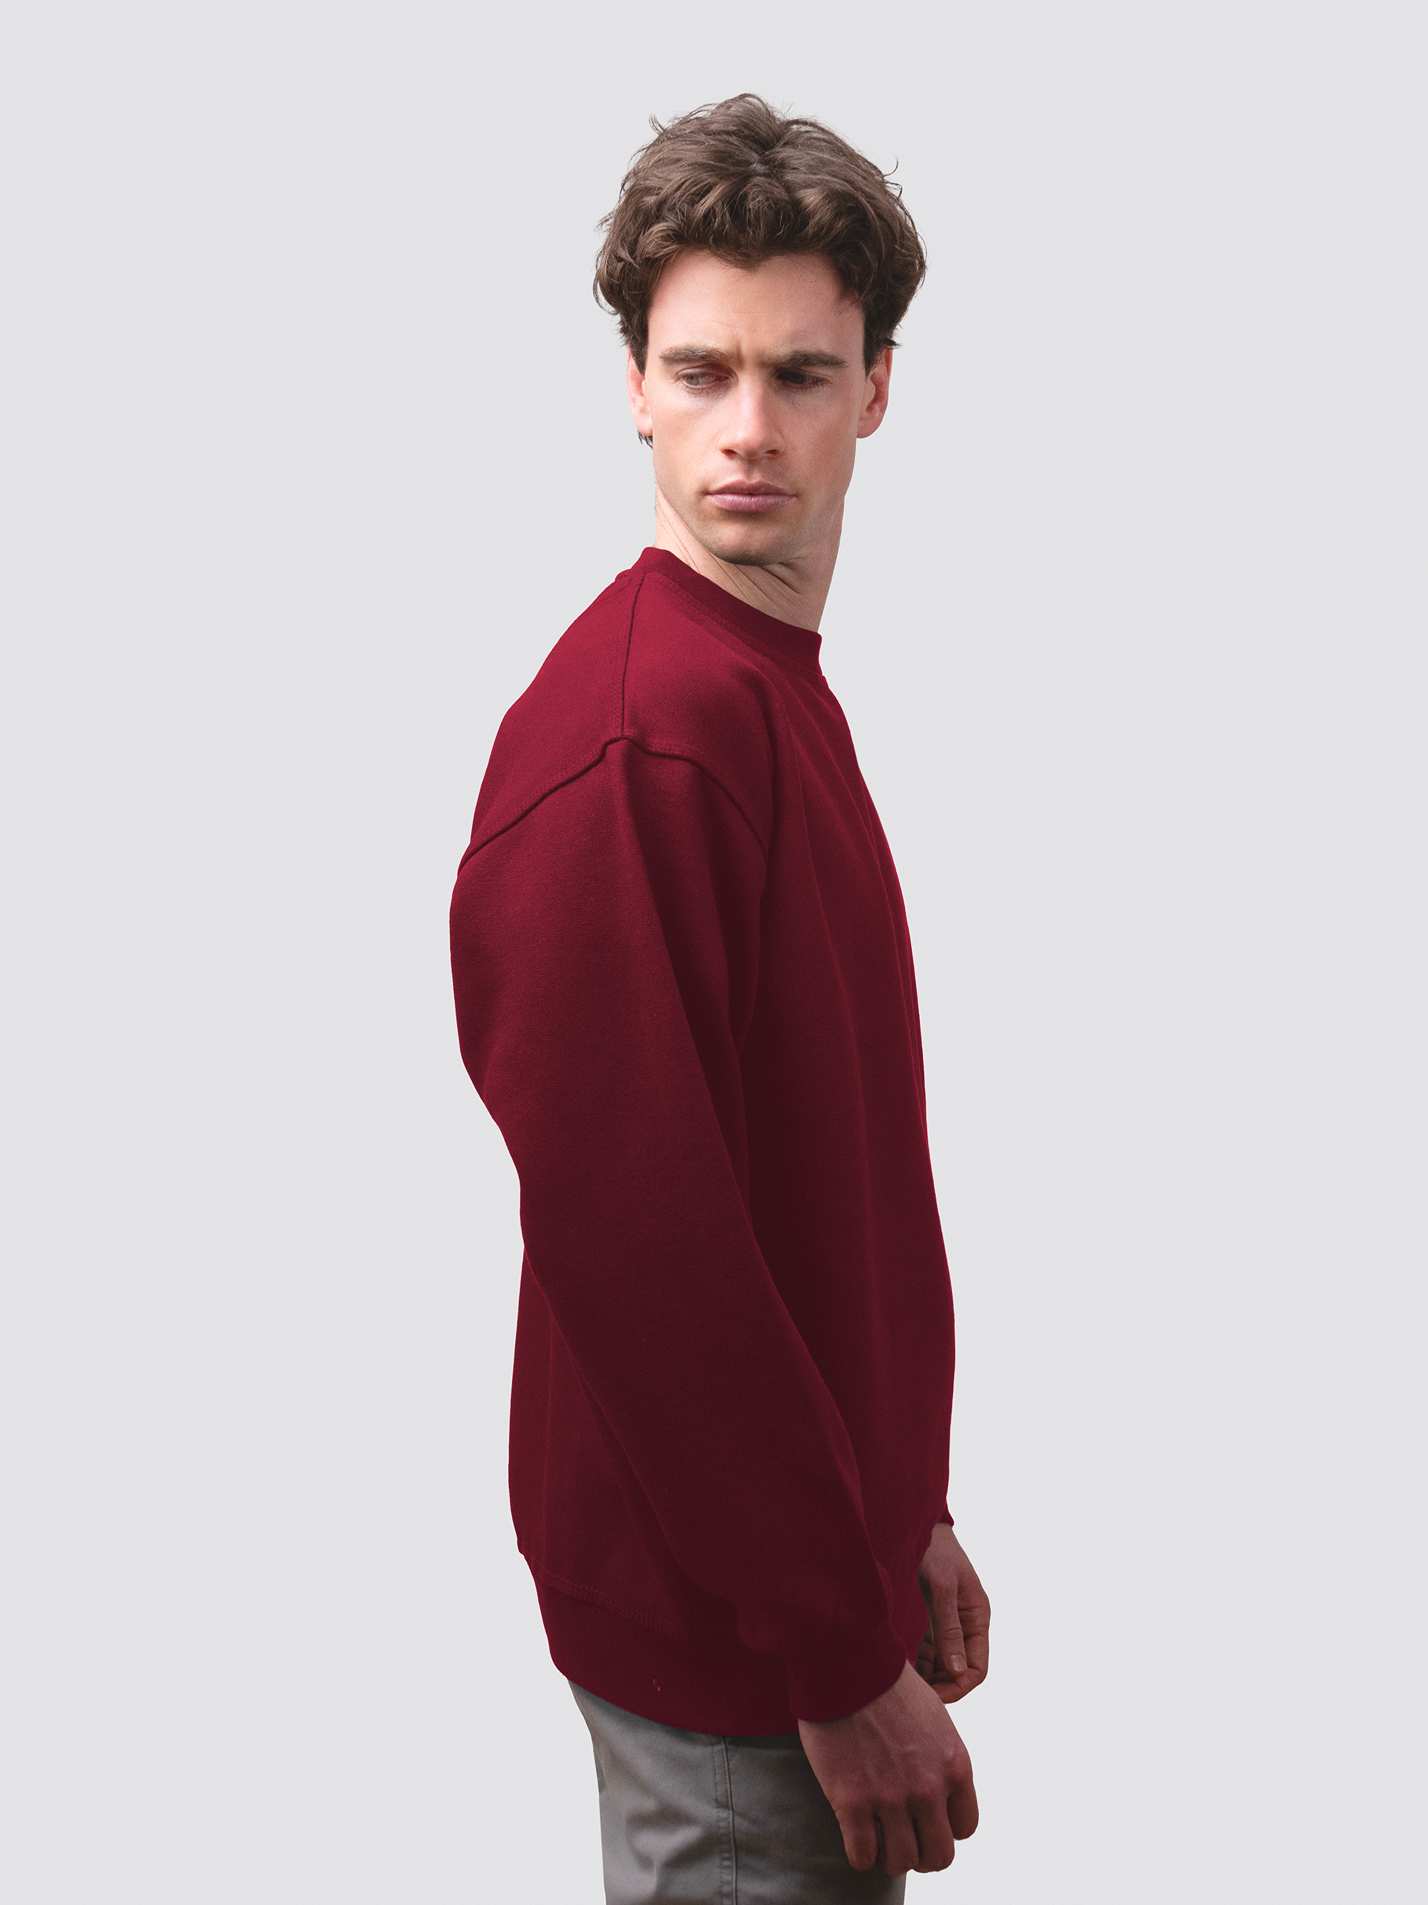 Burgundy, Cambridge sweater made from heavy fabric